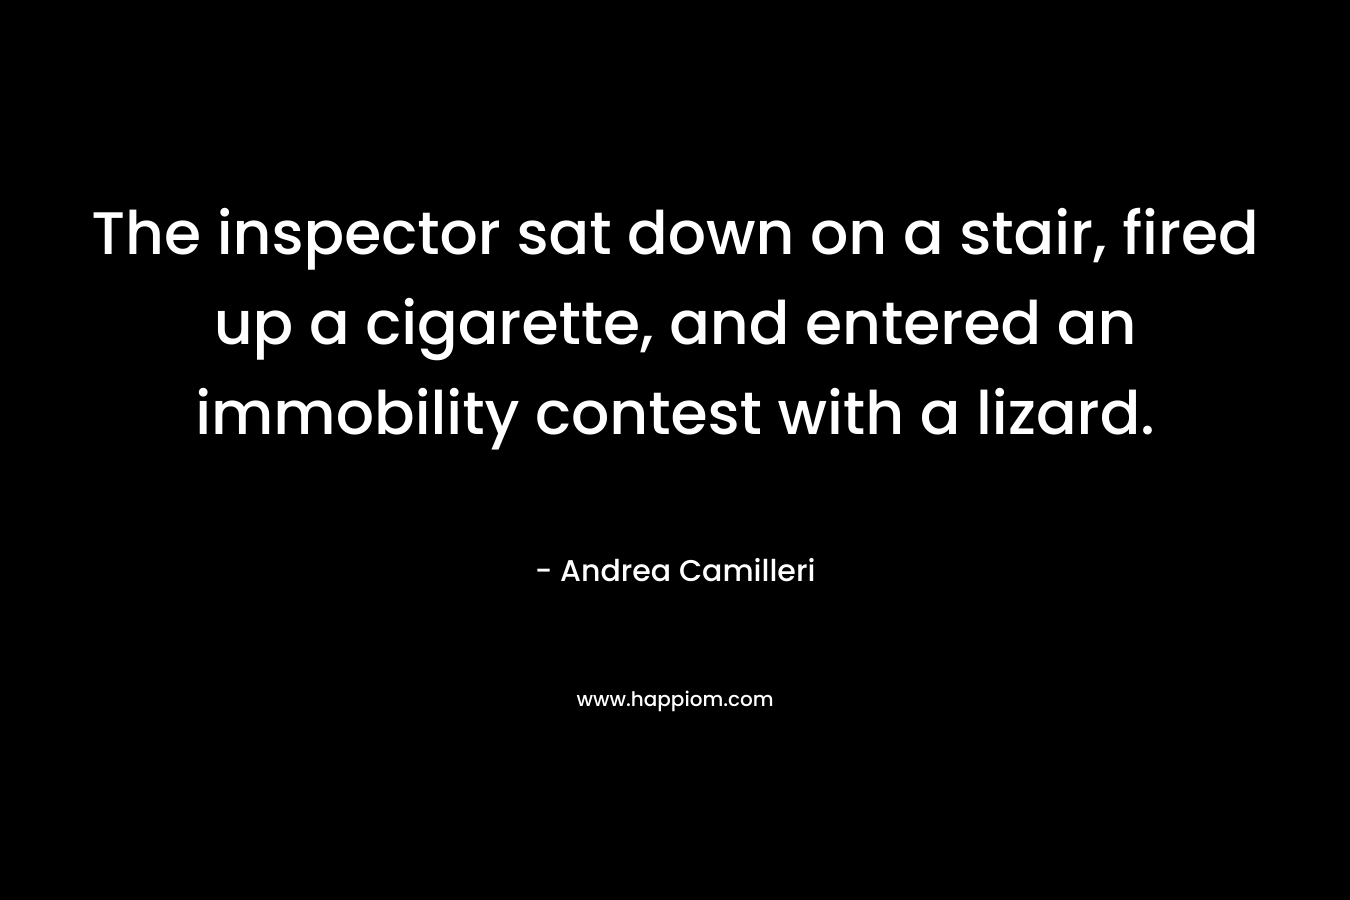 The inspector sat down on a stair, fired up a cigarette, and entered an immobility contest with a lizard. – Andrea Camilleri